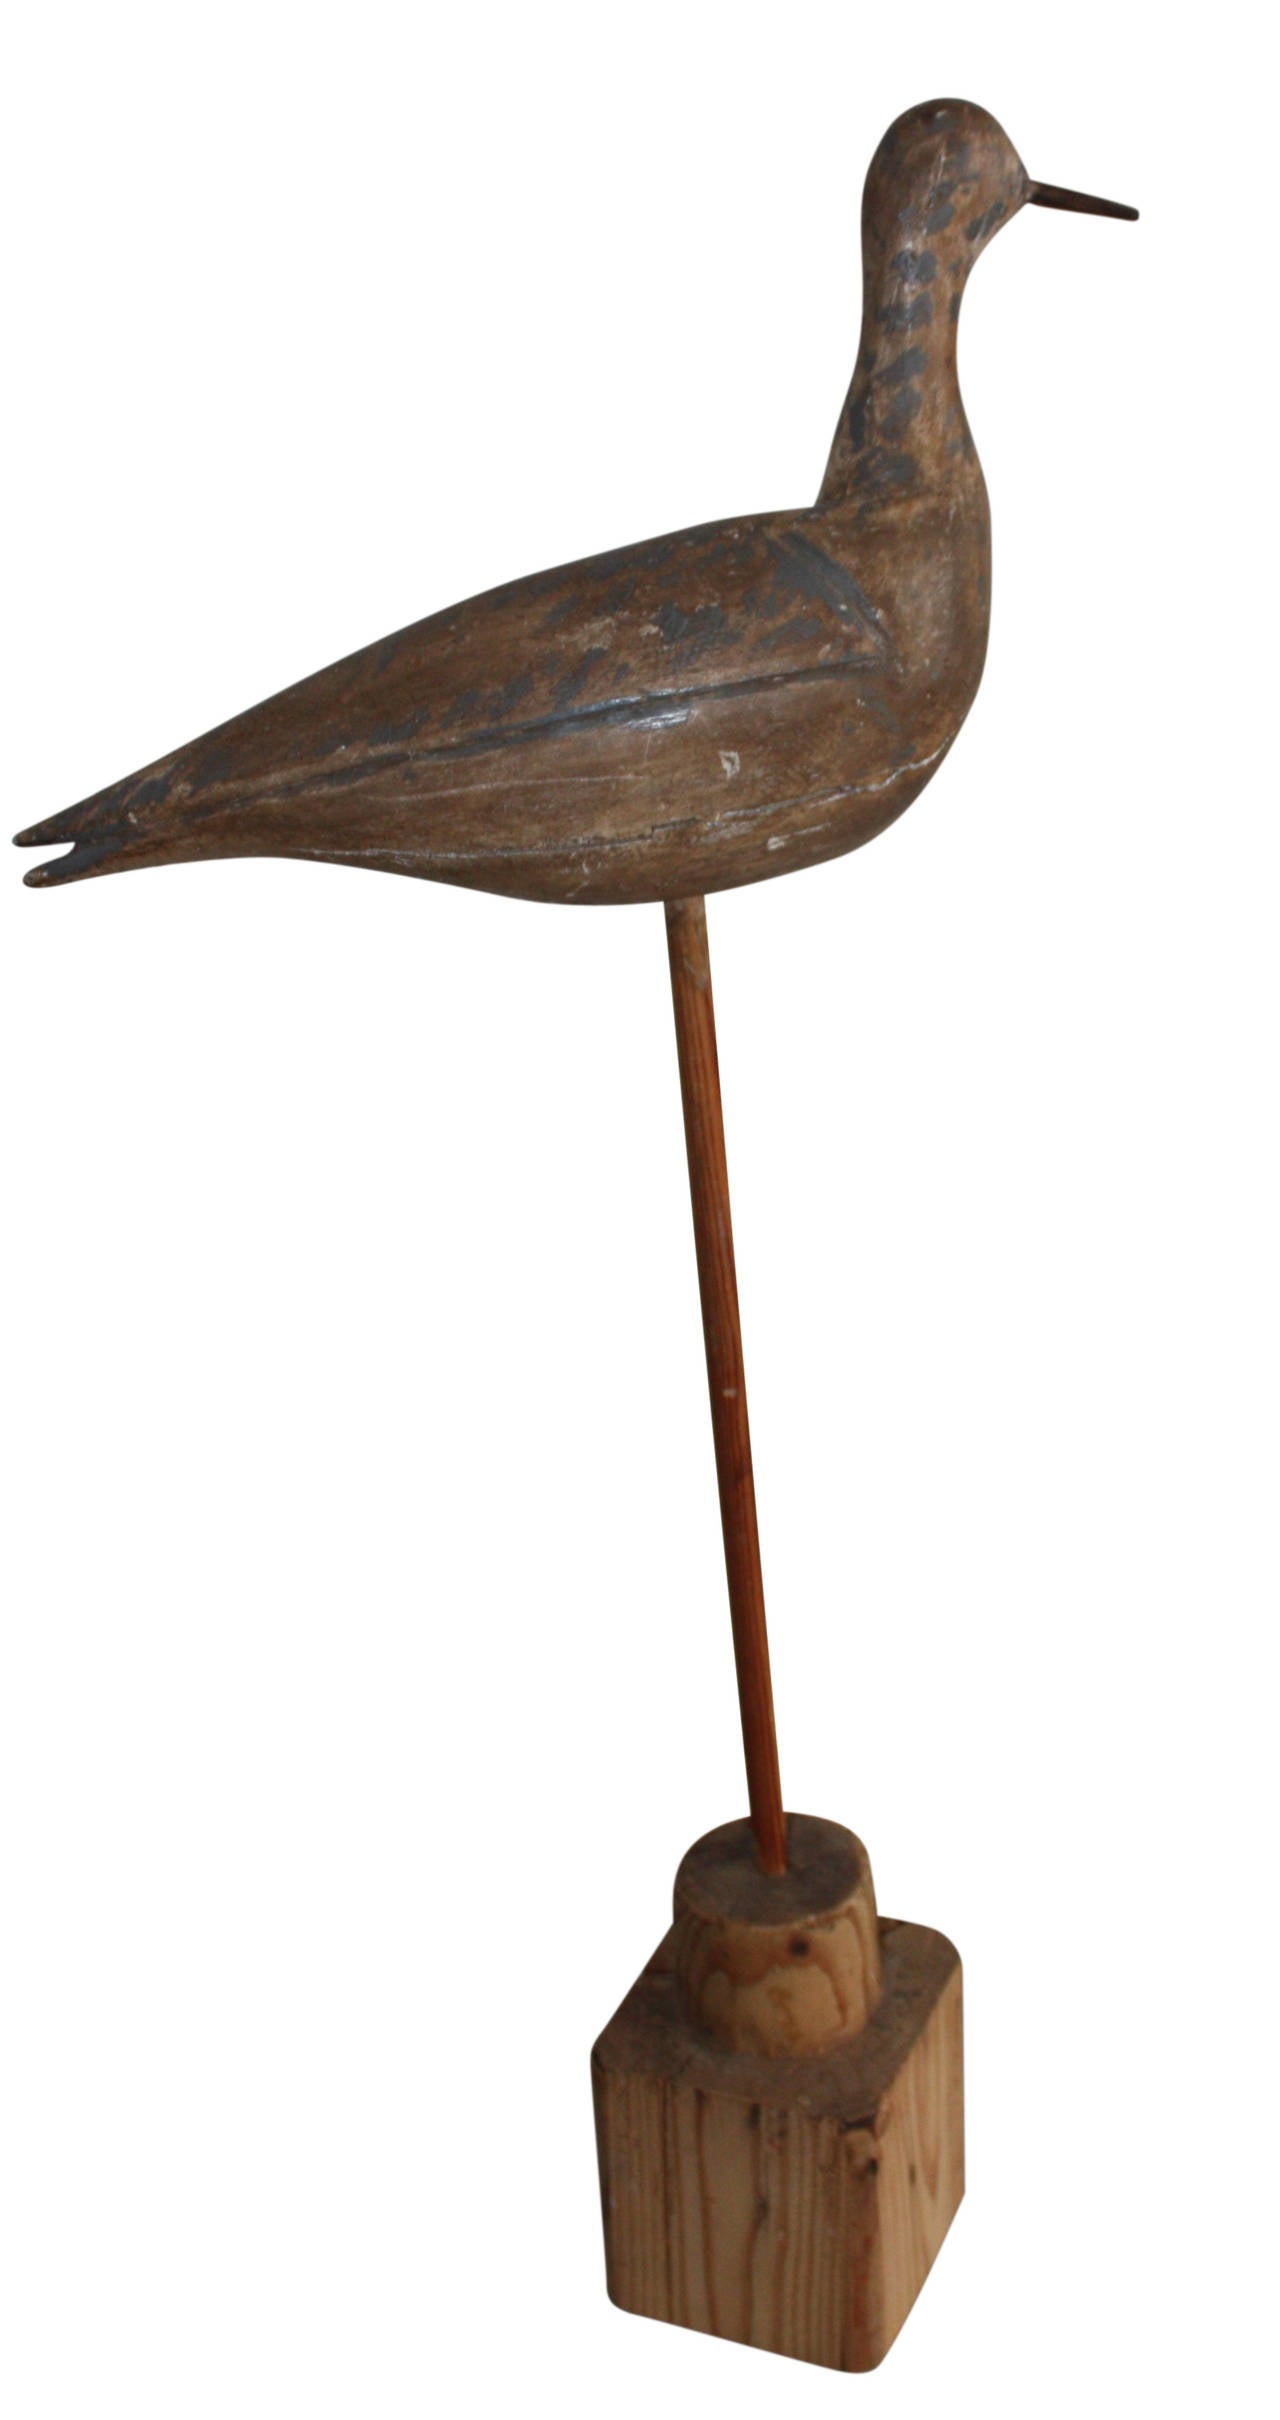 Very nice wood decoy, carved and painted as a grouse. Placed on a stick and wooden base.